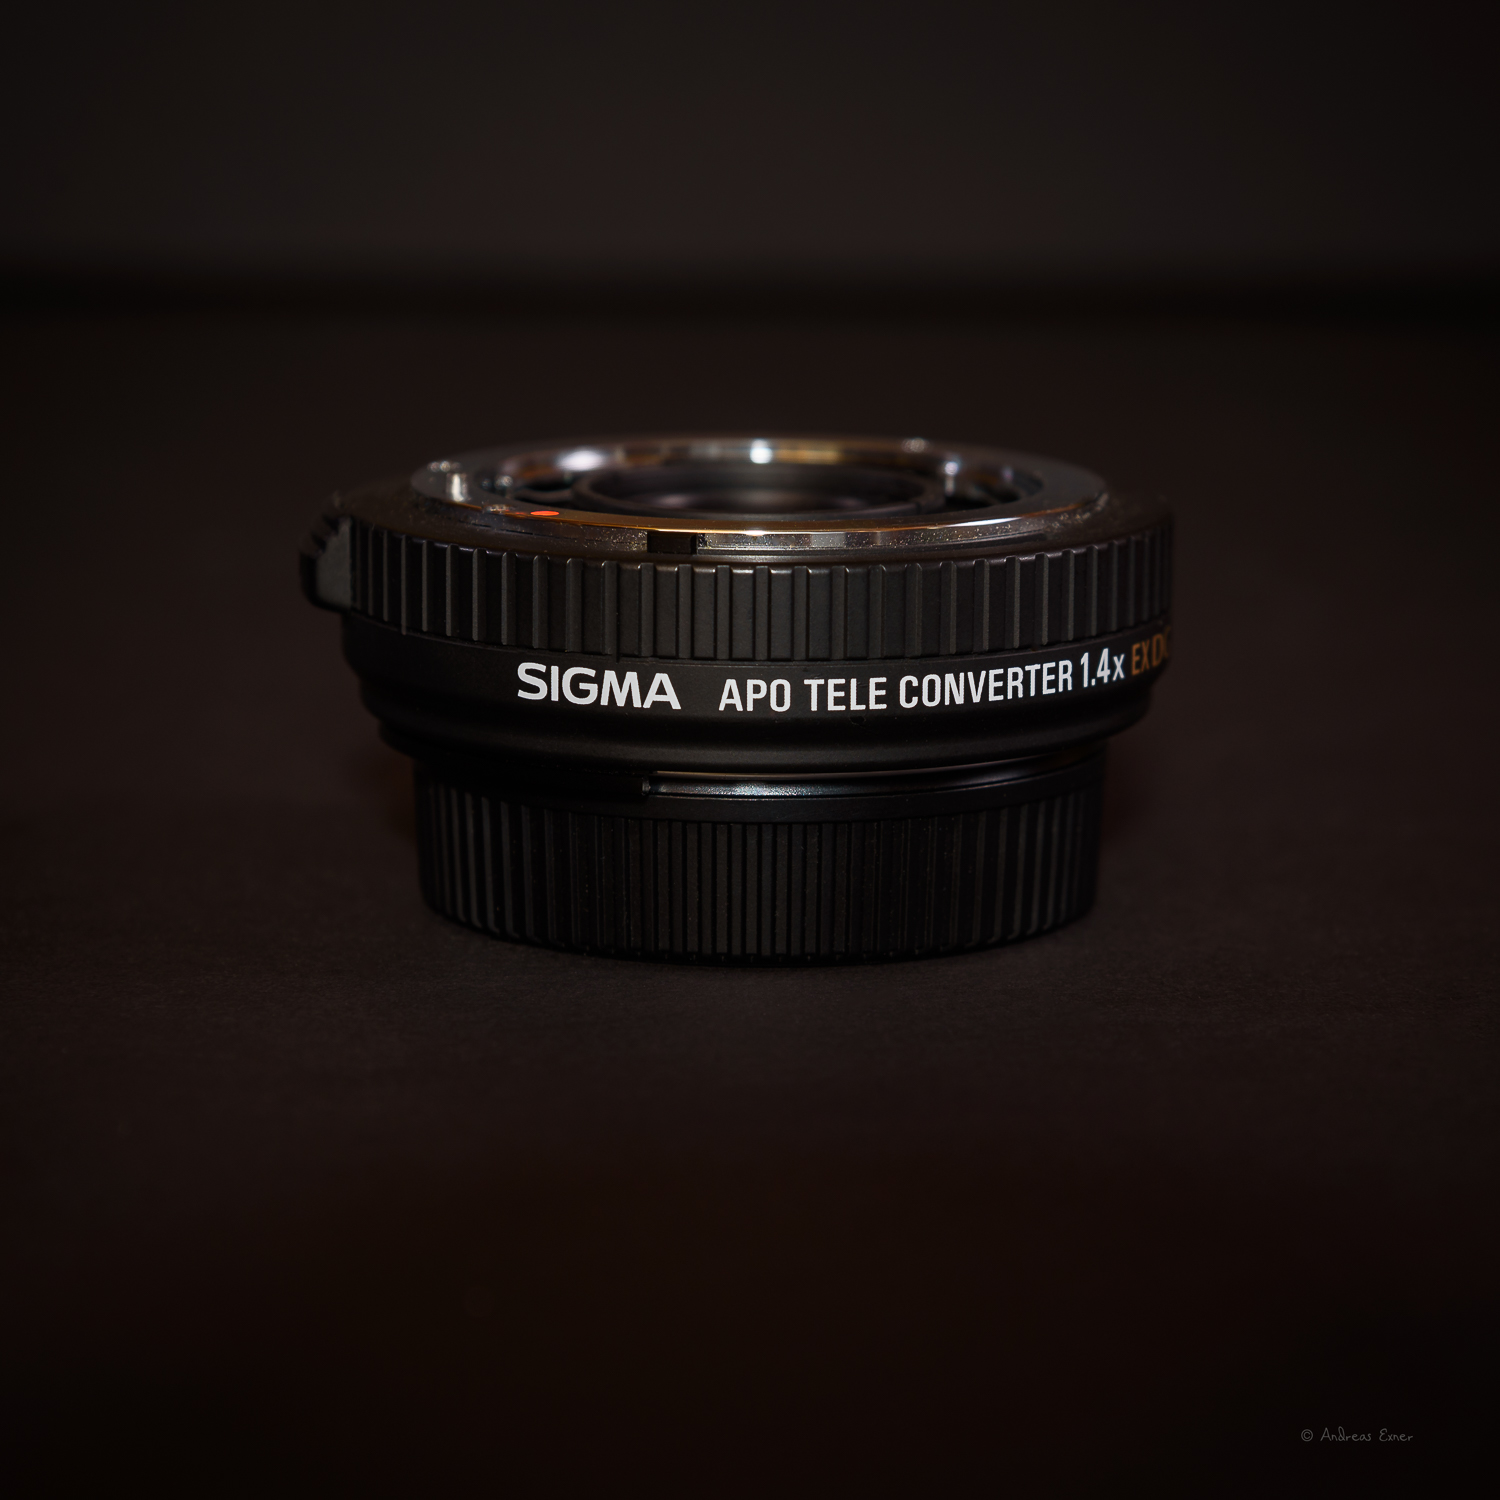  SIGMA APO Teleconverter 1.4x EX DG  In combination with the Sigma 150-600 it results in an effective focal length of 850 mm and maximum aperture at f/9. In sufficient light and with good contrast autofocus still works on the NIKON D750 with the tele